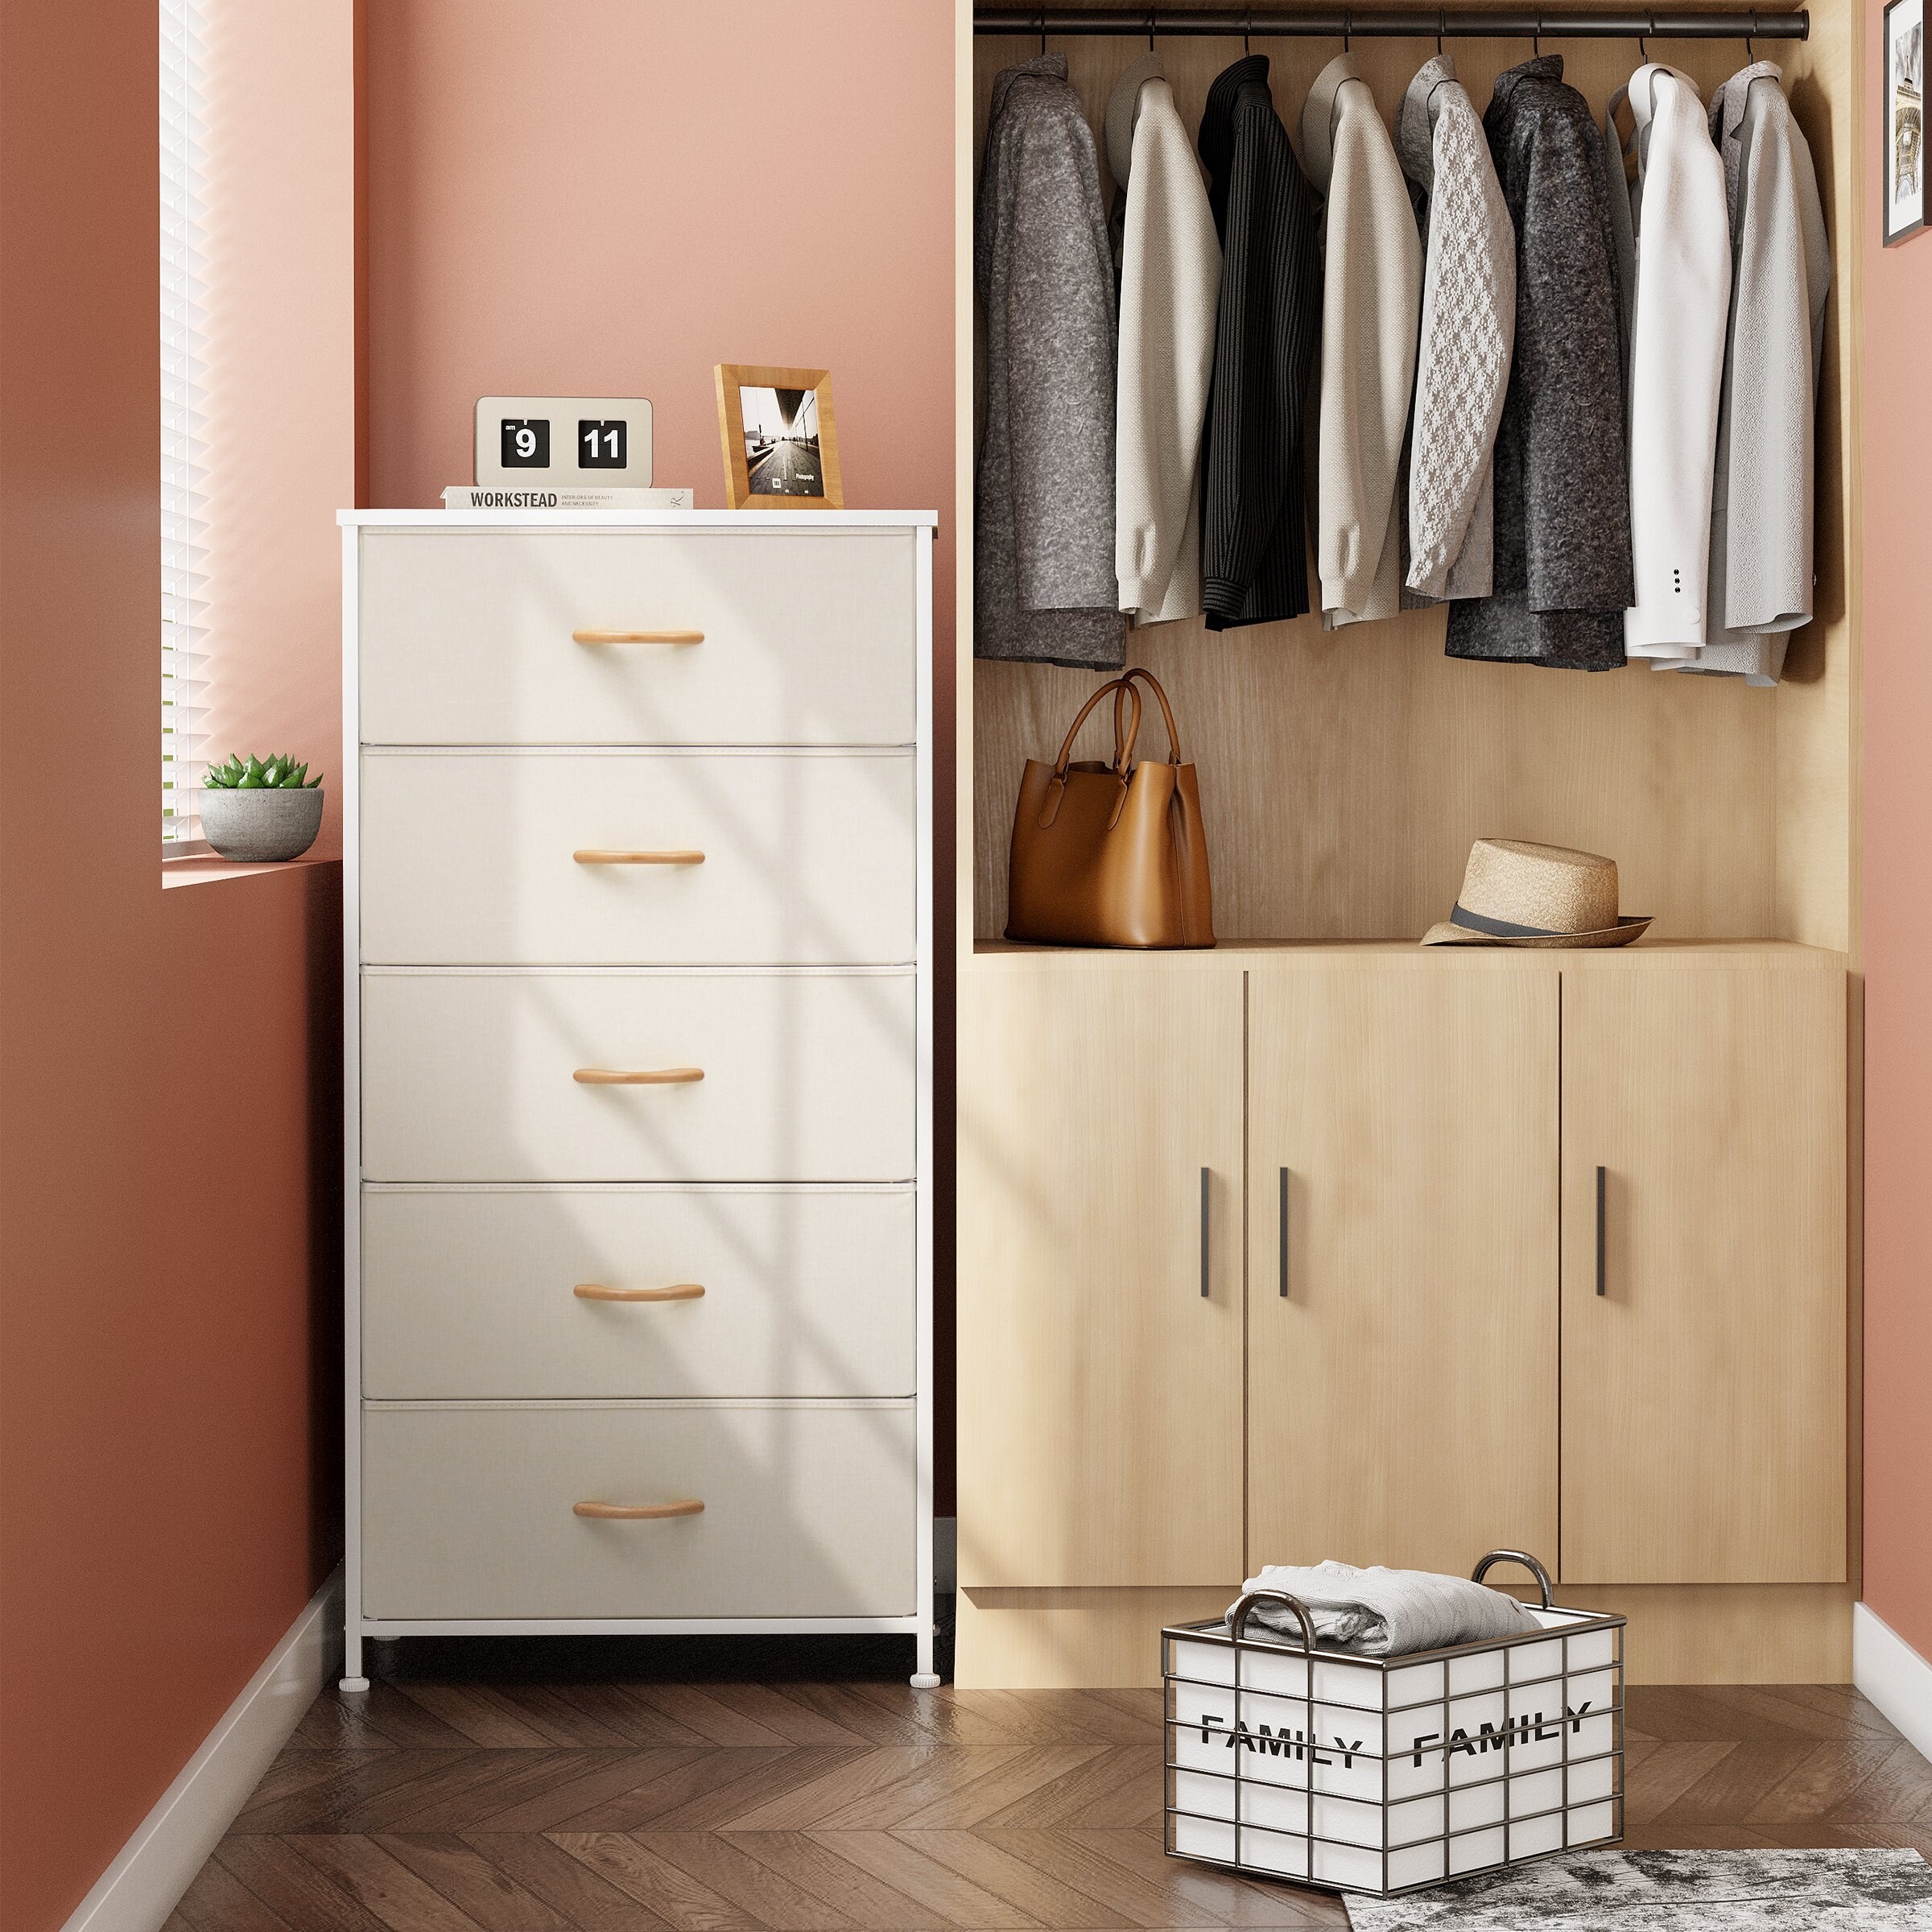 https://ak1.ostkcdn.com/images/products/is/images/direct/4aeab1fe7e678addea574b1527d856a55c22ccd5/5-Drawers-Vertical-Dresser-Storage-Tower-Organizer-Unit-for-Bedroom.jpg